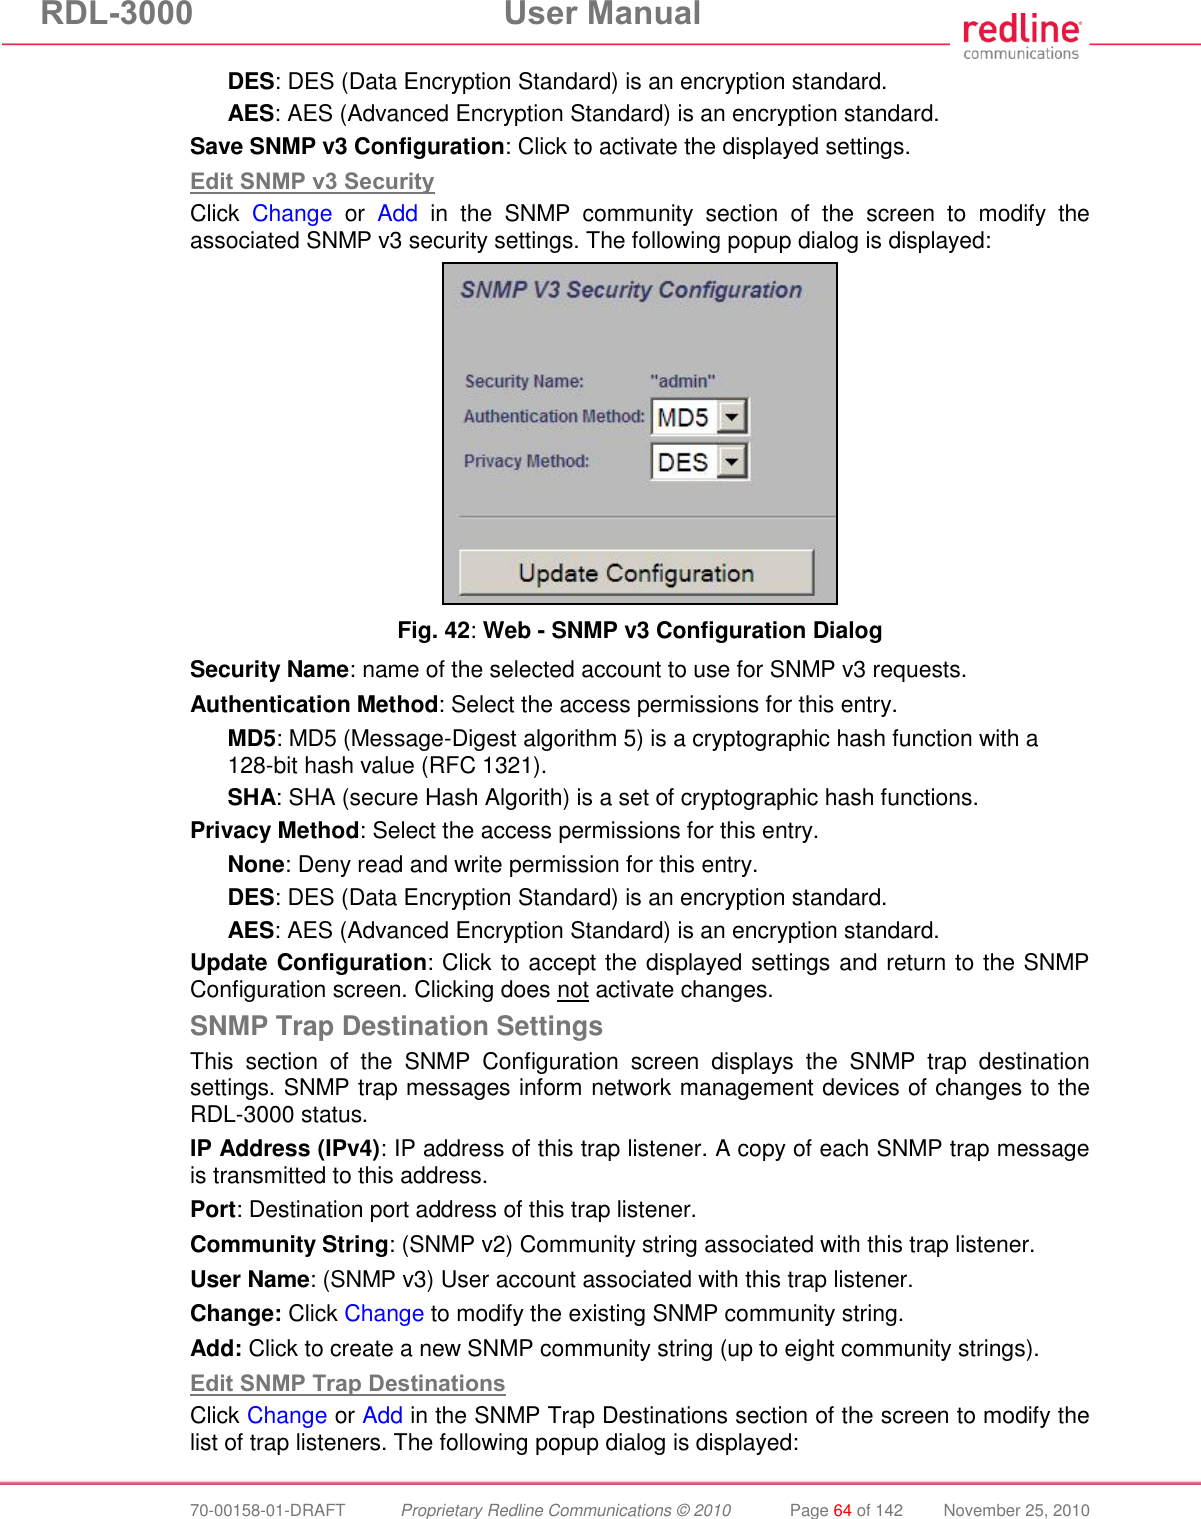 RDL-3000  User Manual  70-00158-01-DRAFT  Proprietary Redline Communications © 2010  Page 64 of 142  November 25, 2010 DES: DES (Data Encryption Standard) is an encryption standard. AES: AES (Advanced Encryption Standard) is an encryption standard. Save SNMP v3 Configuration: Click to activate the displayed settings. Edit SNMP v3 Security Click  Change  or  Add  in  the  SNMP  community  section  of  the  screen  to  modify  the associated SNMP v3 security settings. The following popup dialog is displayed:  Fig. 42: Web - SNMP v3 Configuration Dialog Security Name: name of the selected account to use for SNMP v3 requests. Authentication Method: Select the access permissions for this entry. MD5: MD5 (Message-Digest algorithm 5) is a cryptographic hash function with a 128-bit hash value (RFC 1321). SHA: SHA (secure Hash Algorith) is a set of cryptographic hash functions. Privacy Method: Select the access permissions for this entry. None: Deny read and write permission for this entry. DES: DES (Data Encryption Standard) is an encryption standard. AES: AES (Advanced Encryption Standard) is an encryption standard. Update Configuration: Click to accept the displayed settings and return to the SNMP Configuration screen. Clicking does not activate changes. SNMP Trap Destination Settings This  section  of  the  SNMP  Configuration  screen  displays  the  SNMP  trap  destination settings. SNMP trap messages inform network management devices of changes to the RDL-3000 status. IP Address (IPv4): IP address of this trap listener. A copy of each SNMP trap message is transmitted to this address. Port: Destination port address of this trap listener. Community String: (SNMP v2) Community string associated with this trap listener. User Name: (SNMP v3) User account associated with this trap listener. Change: Click Change to modify the existing SNMP community string. Add: Click to create a new SNMP community string (up to eight community strings). Edit SNMP Trap Destinations Click Change or Add in the SNMP Trap Destinations section of the screen to modify the list of trap listeners. The following popup dialog is displayed: 